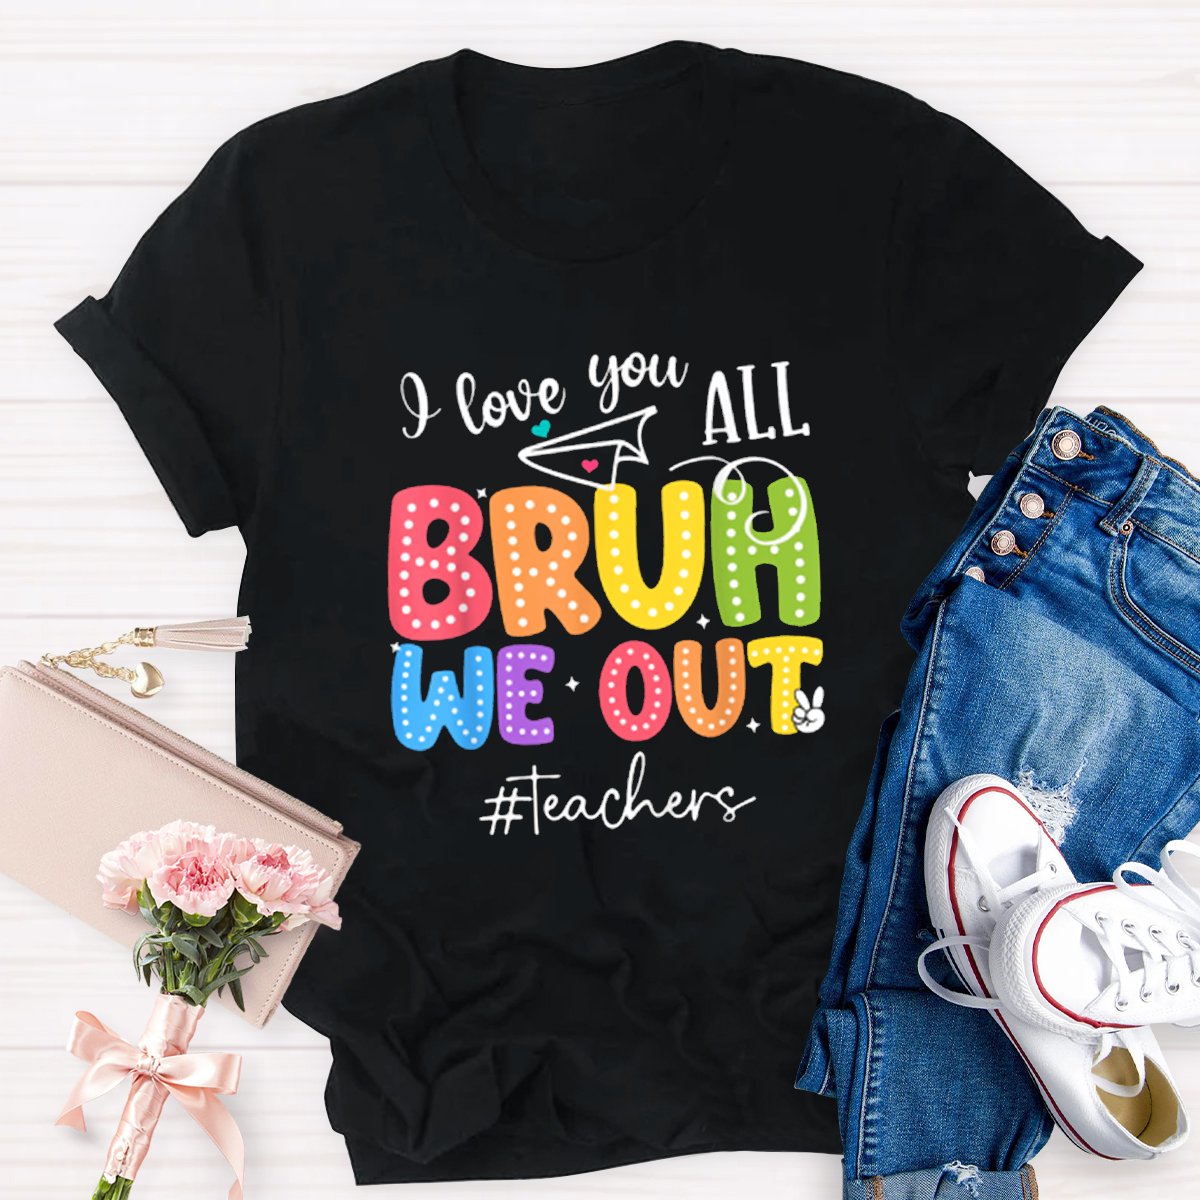 I Love You All Bruh We Out Teacher's Shirt